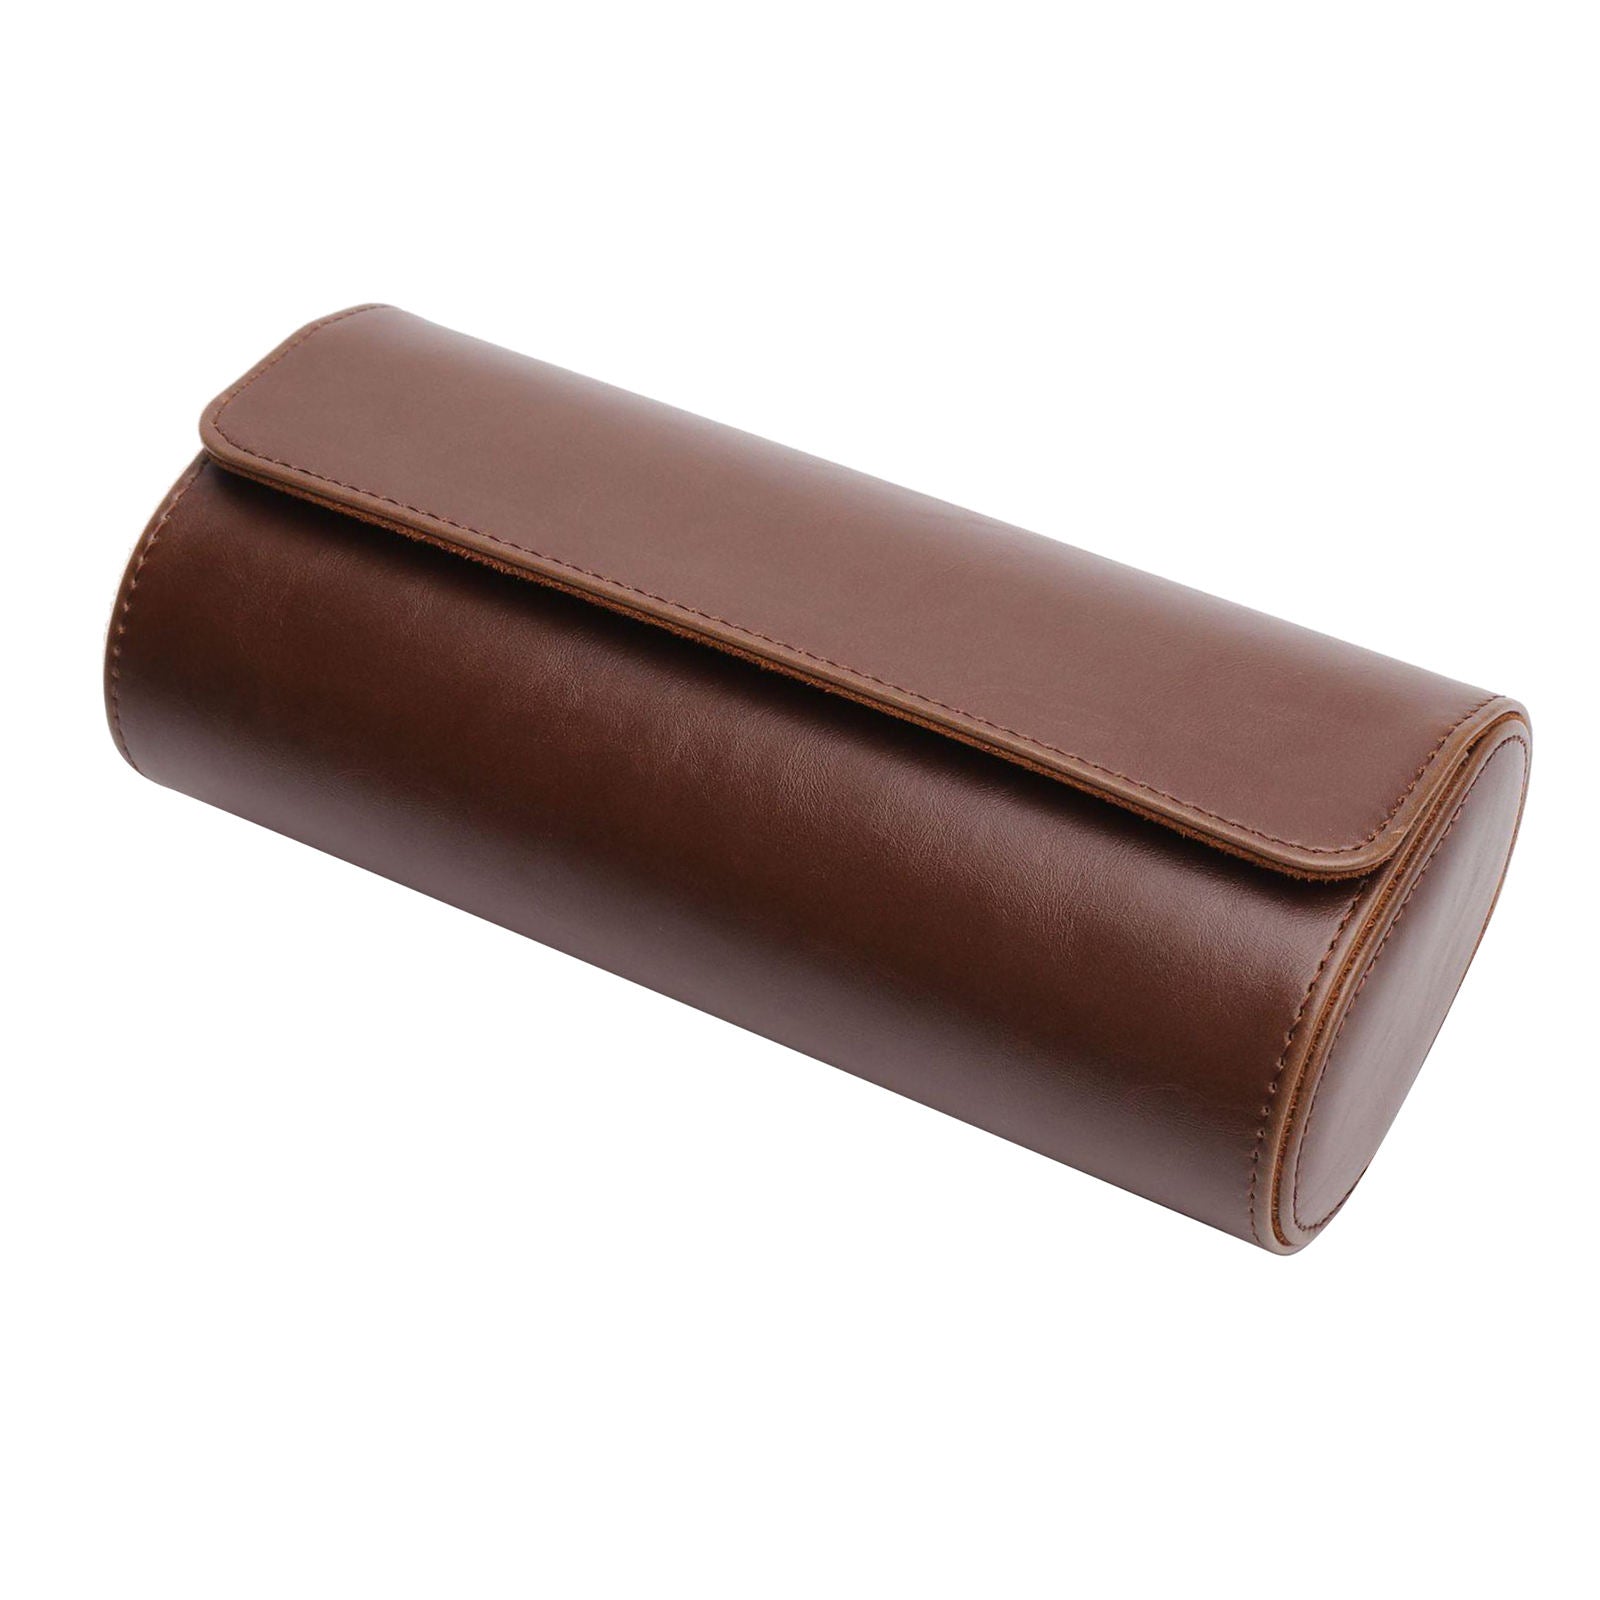 Chic Leather Organizer Watch Storage Box Travel Roll Detachable for Watches